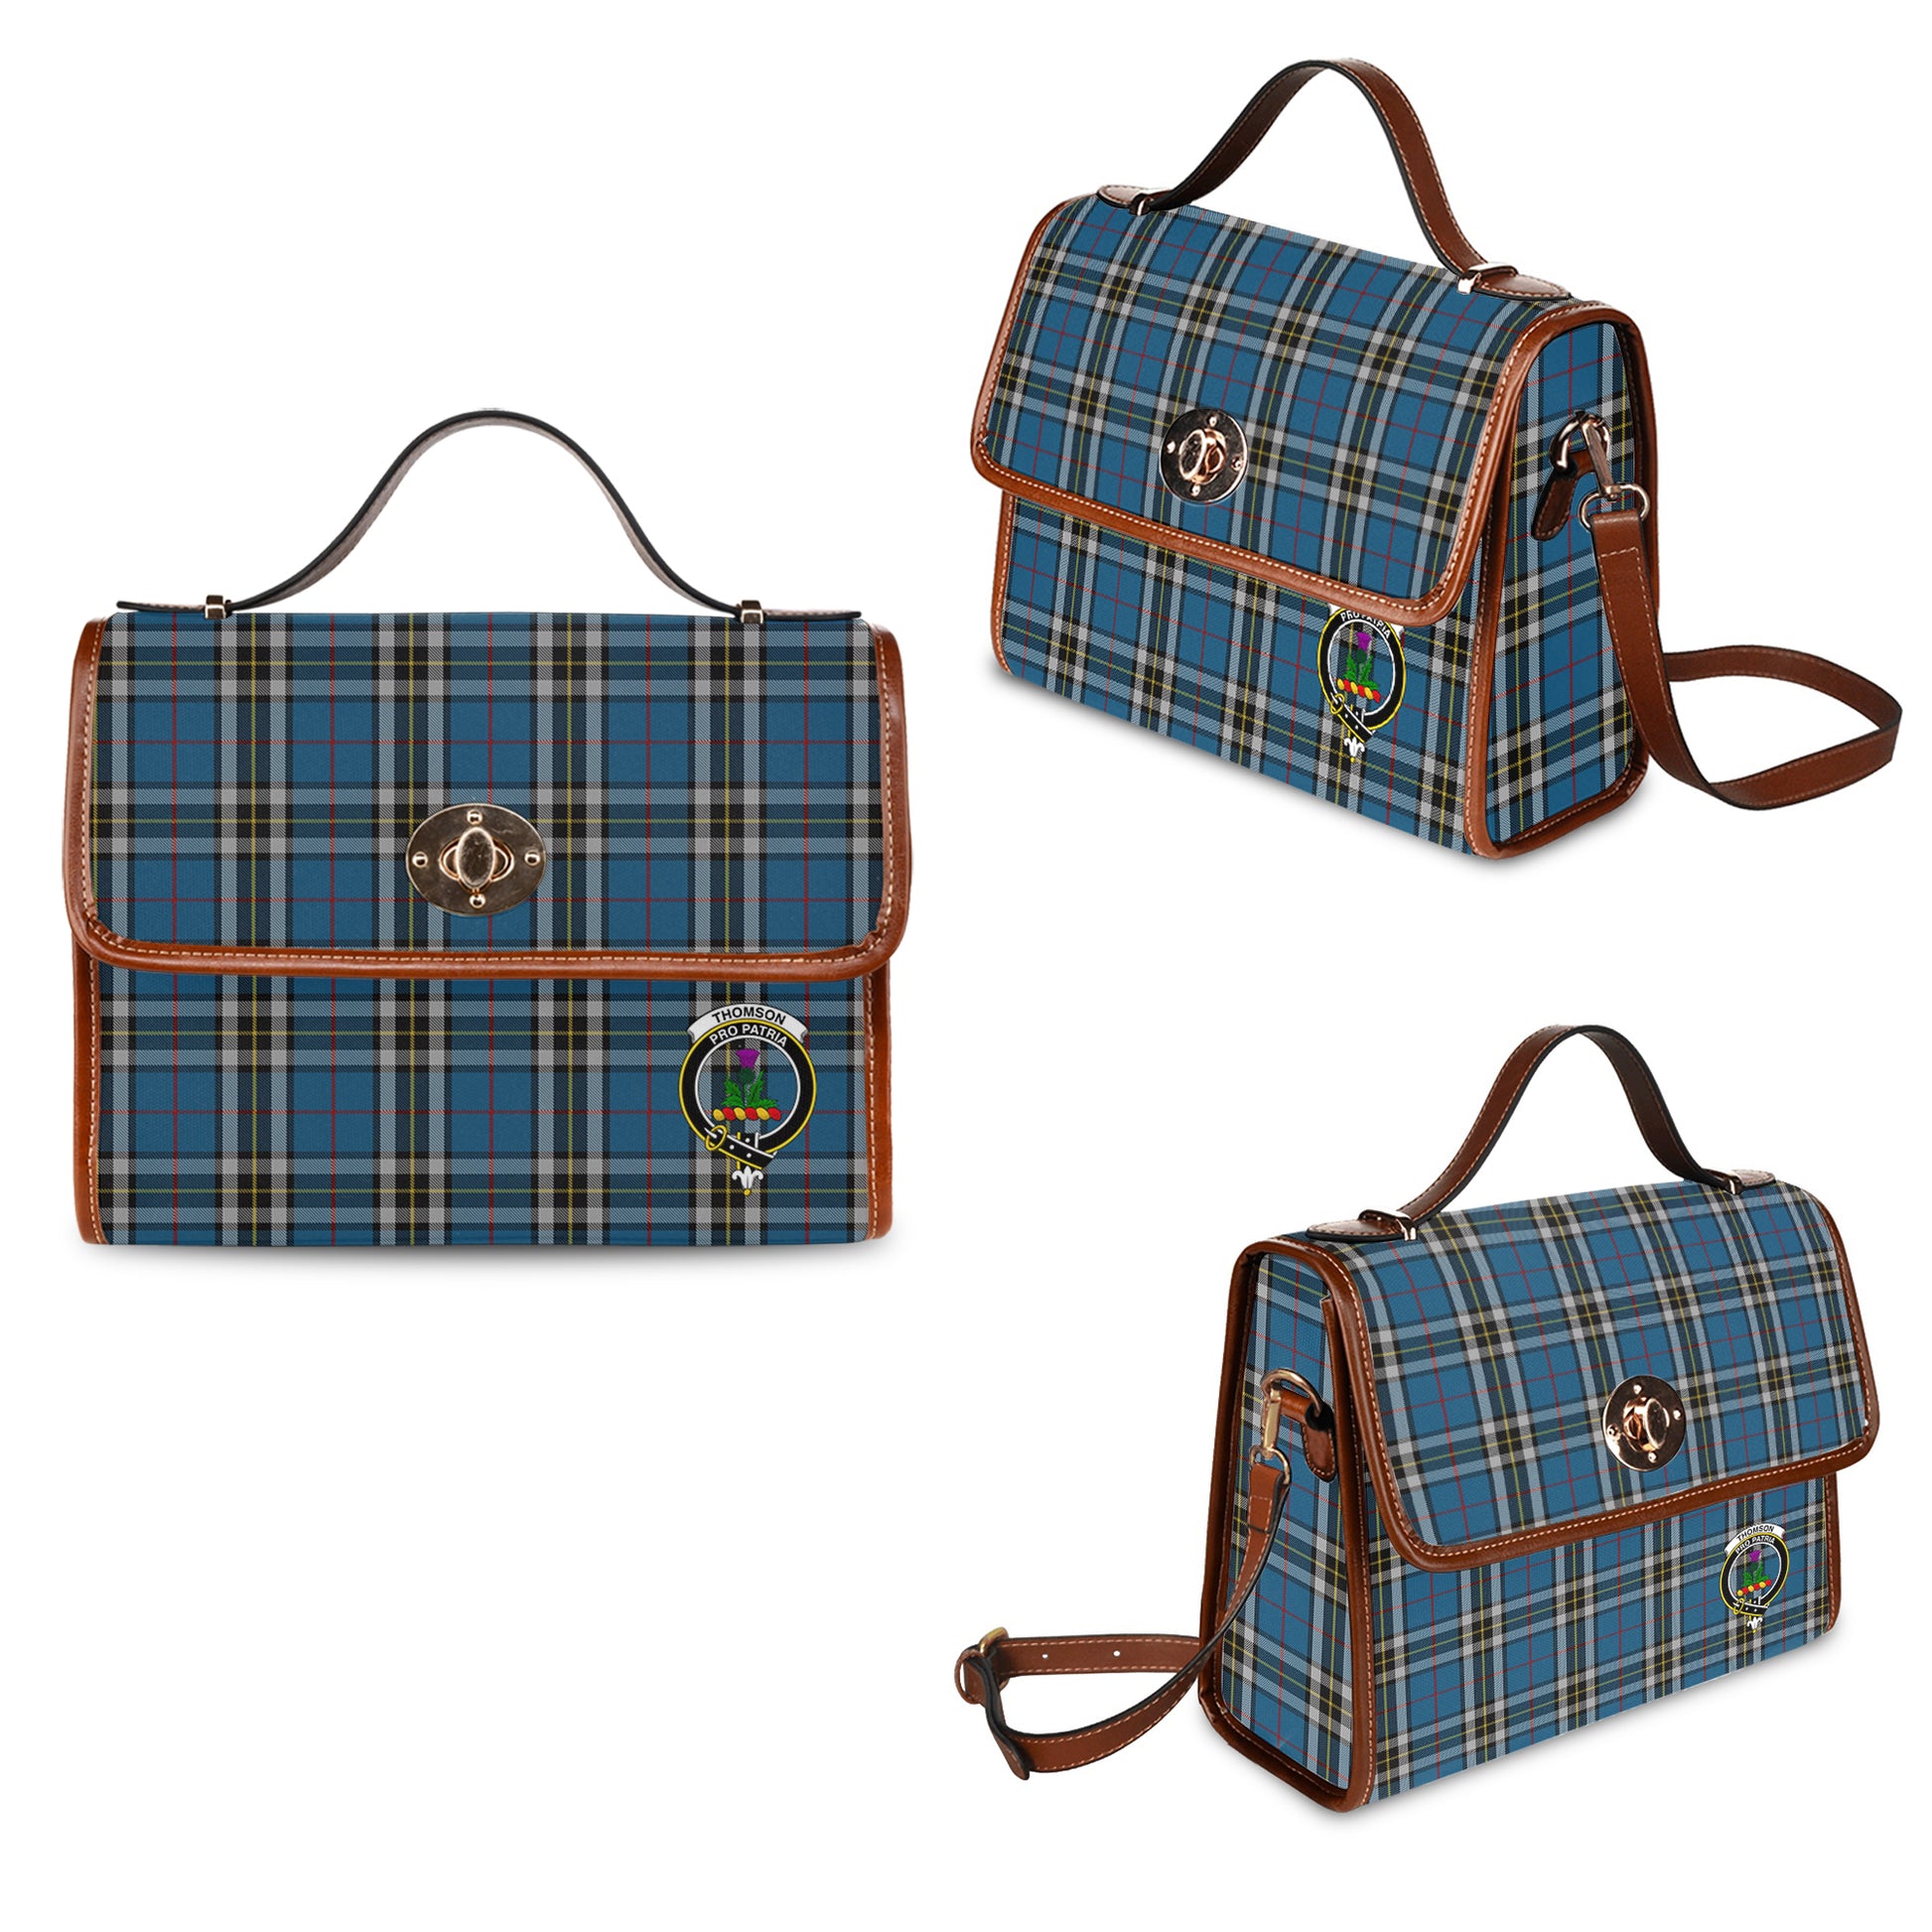 thomson-dress-blue-tartan-leather-strap-waterproof-canvas-bag-with-family-crest